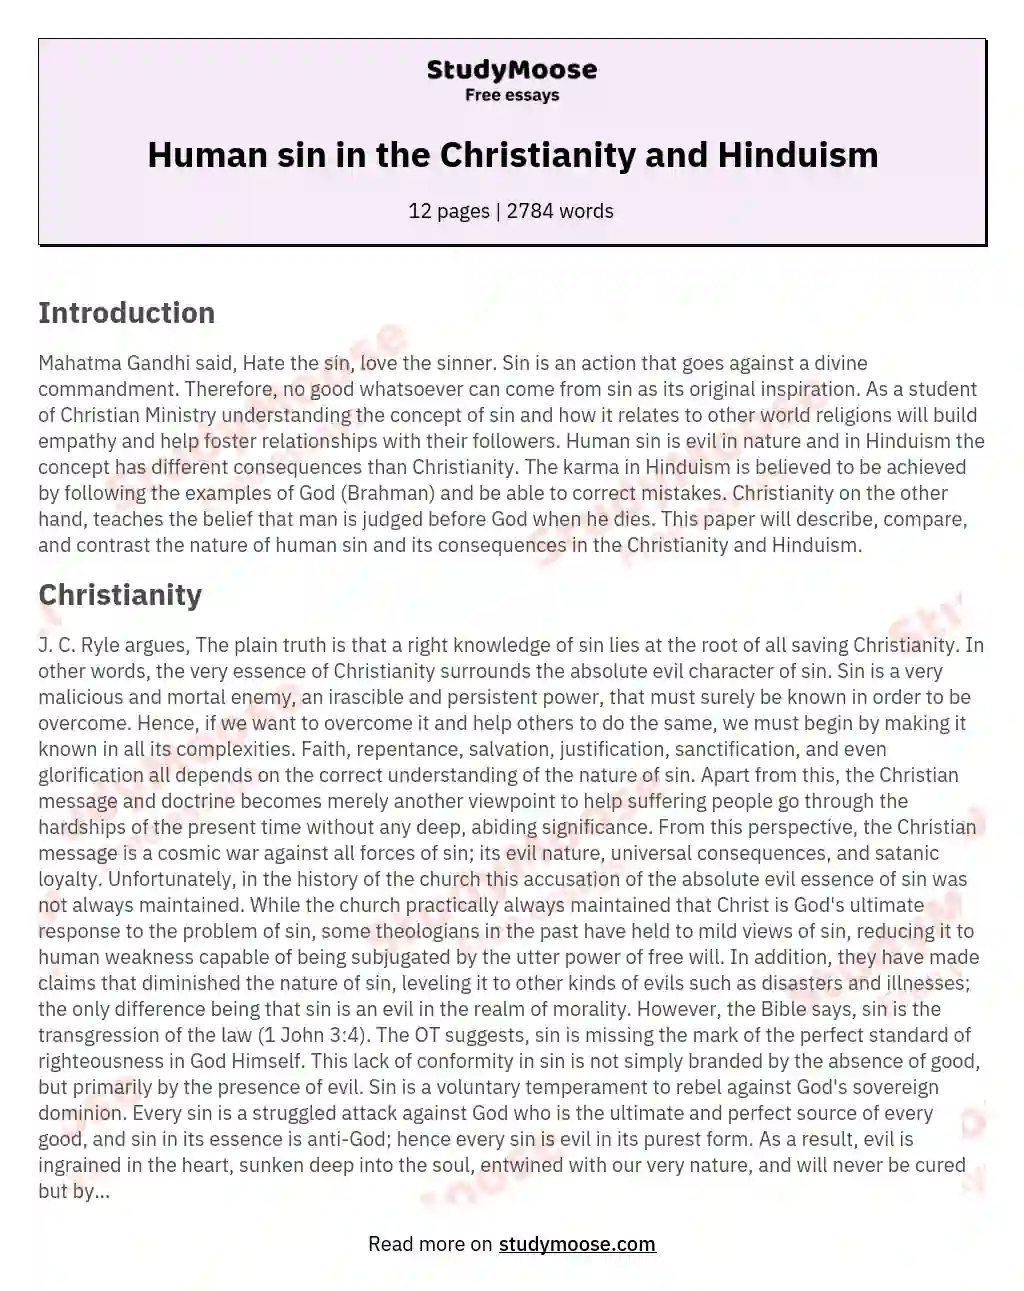 Human sin in the Christianity and Hinduism essay